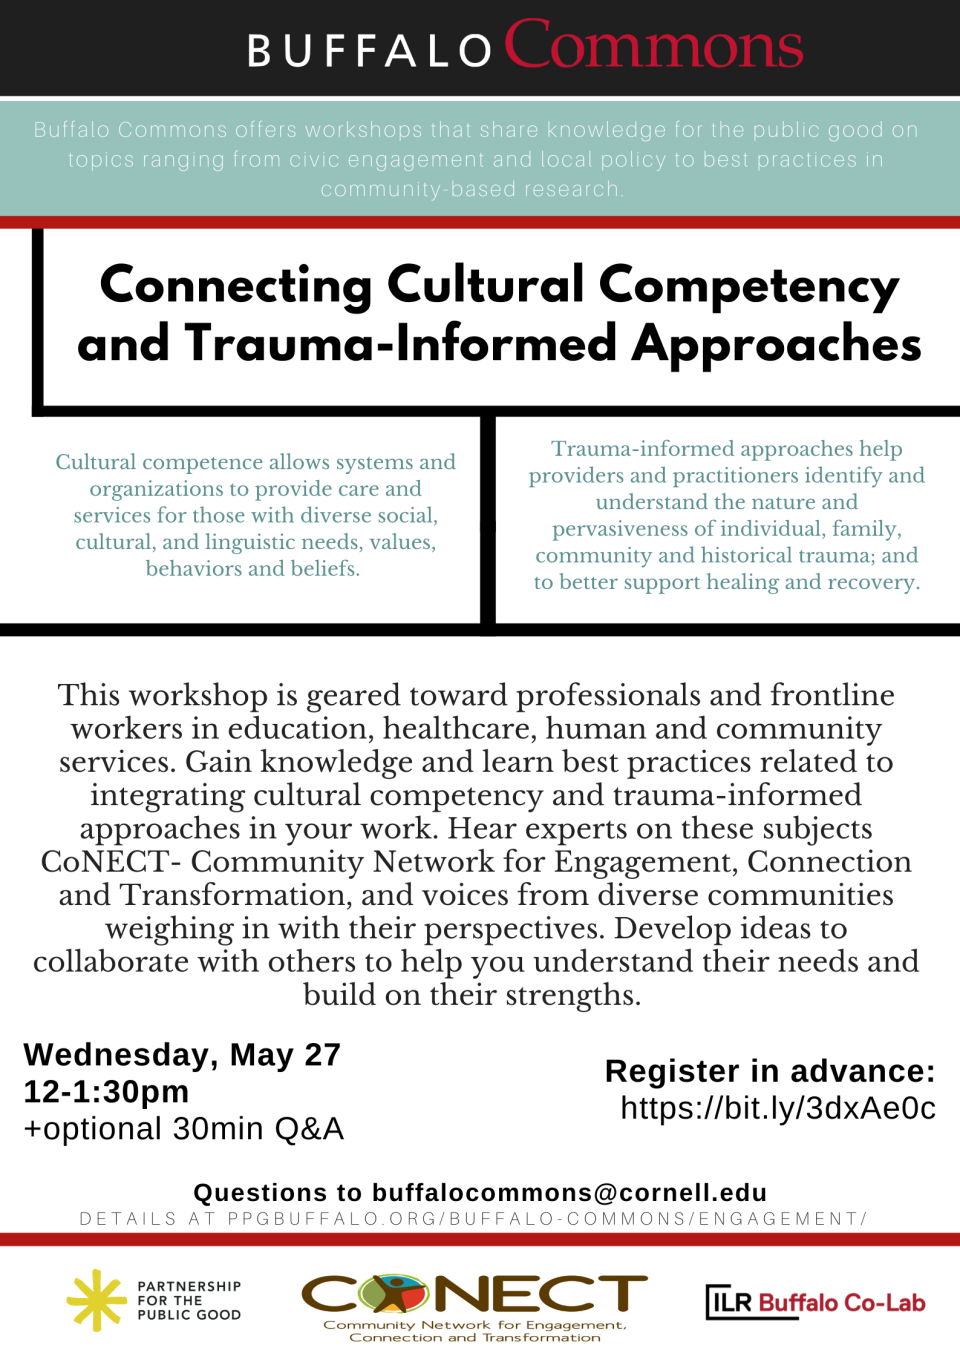 Buffalo Commons Virtual Workshop: Connecting Cultural Competency and Trauma-Informed Approaches